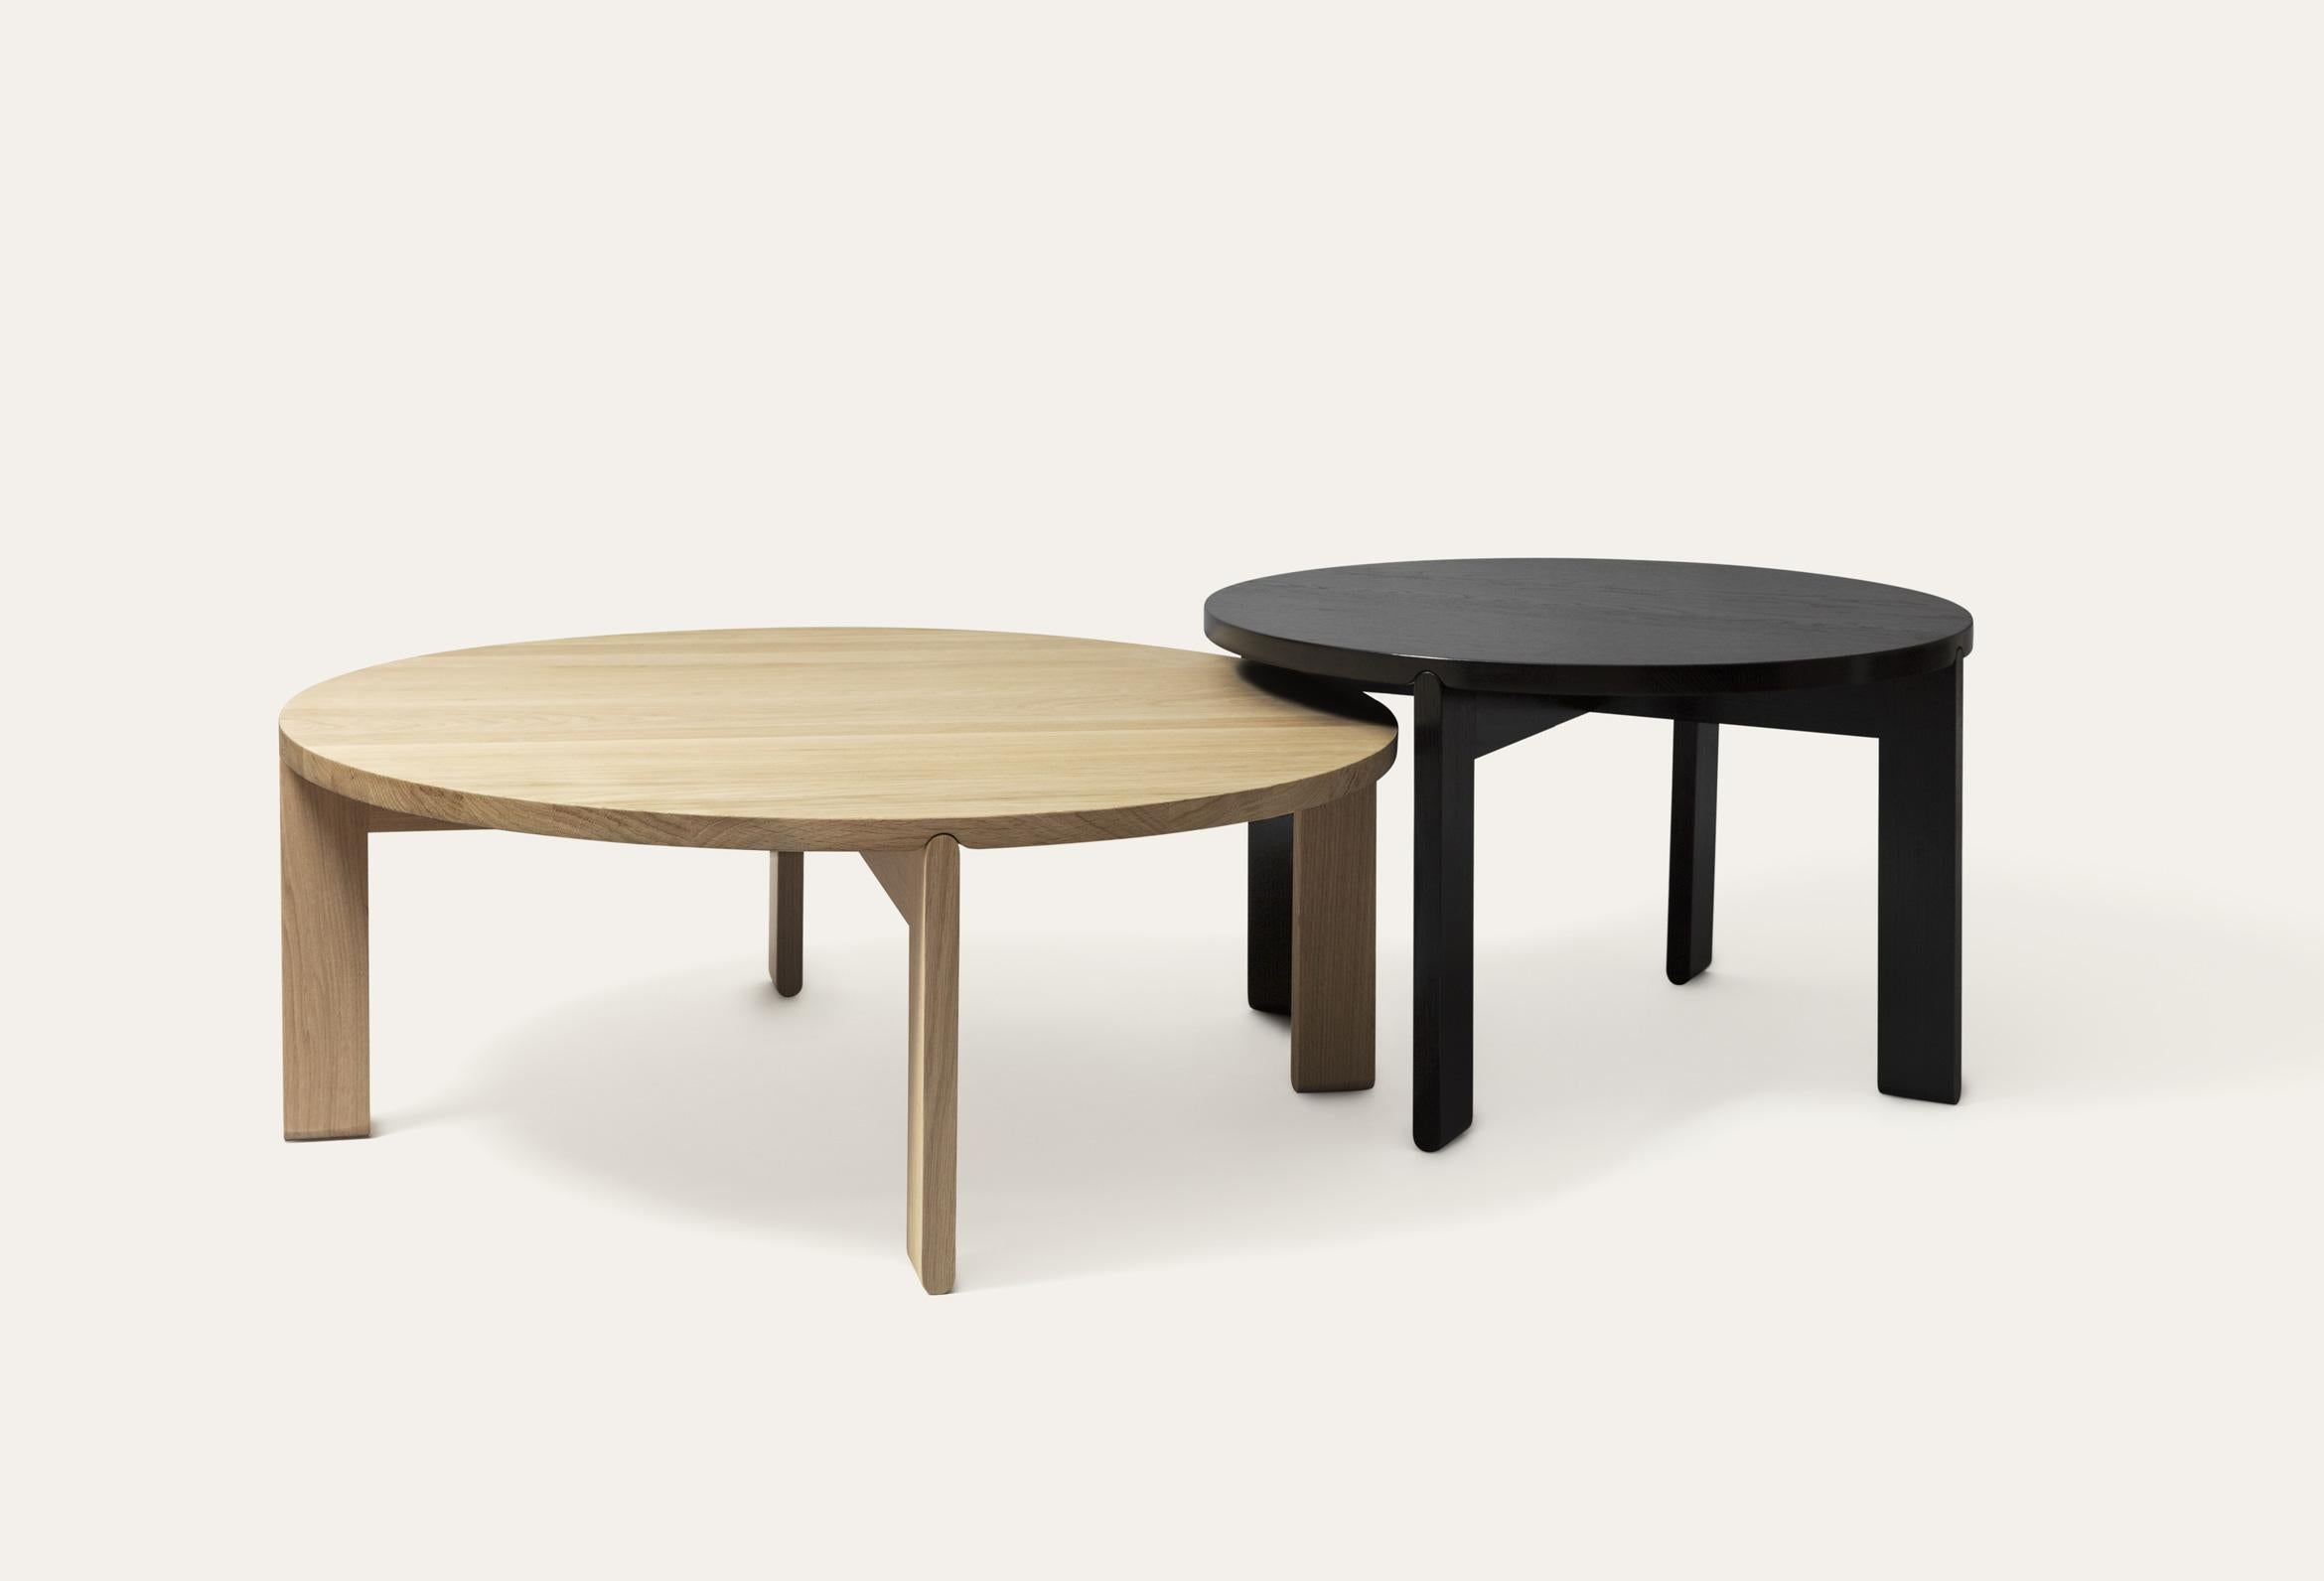 Set of 2 Rond coffee table by Storängen Design
Dimensions: D 75 x H 45 cm, D 100 x H 38 cm
Materials: birch wood.
Available in other colors.

Rond is a coffee table made in solid oak. The different diameters and heights create many